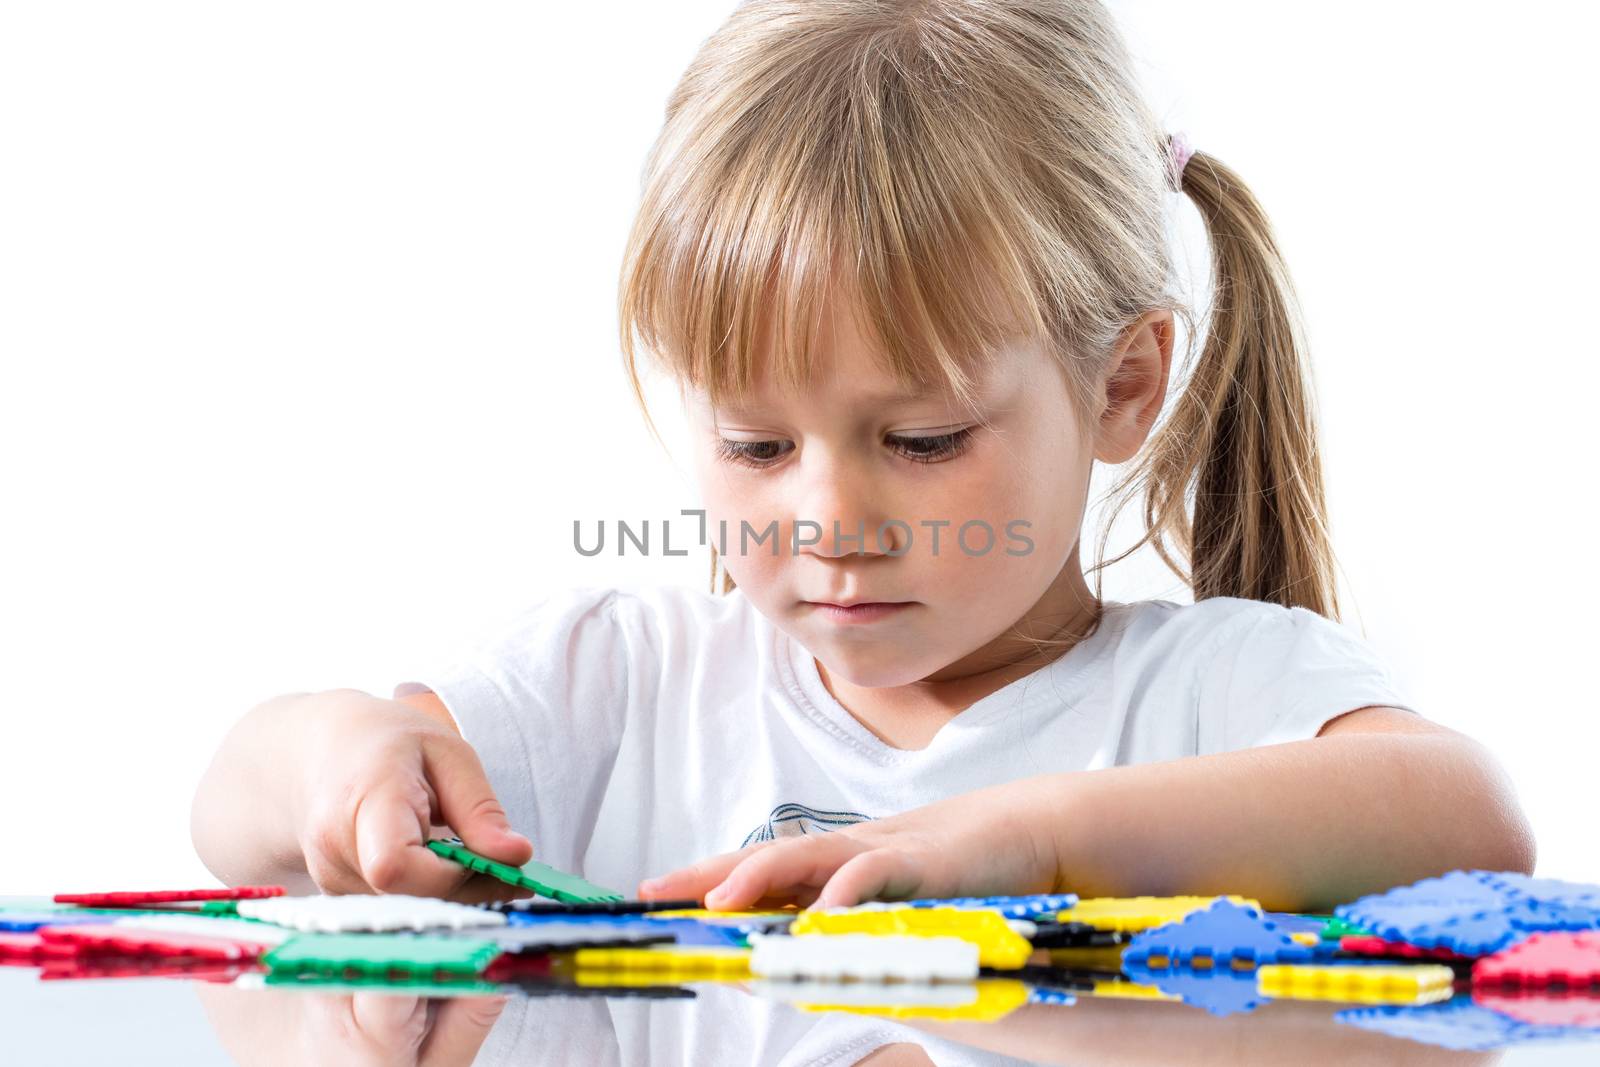 Little girl playing with puzzle pieces. by karelnoppe